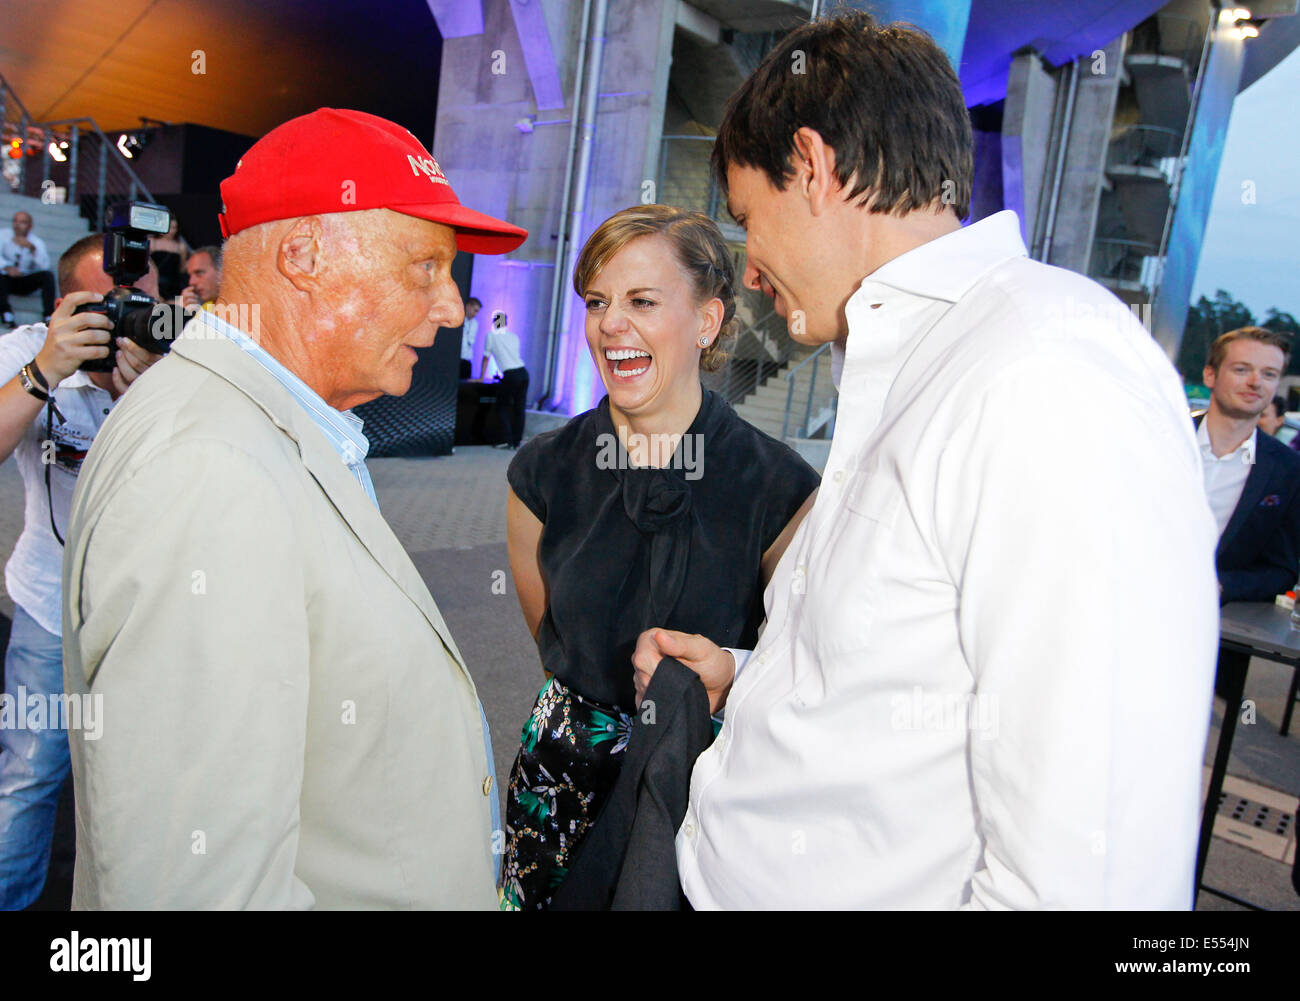 Hockenheim, Germany - July 19, 2014: Formula 1 Grand Prix of Germany with Niki Lauda, Race Driver Susie Wolff and Mercedes GP Team Boss Toto Wolff/picture alliance Stock Photo